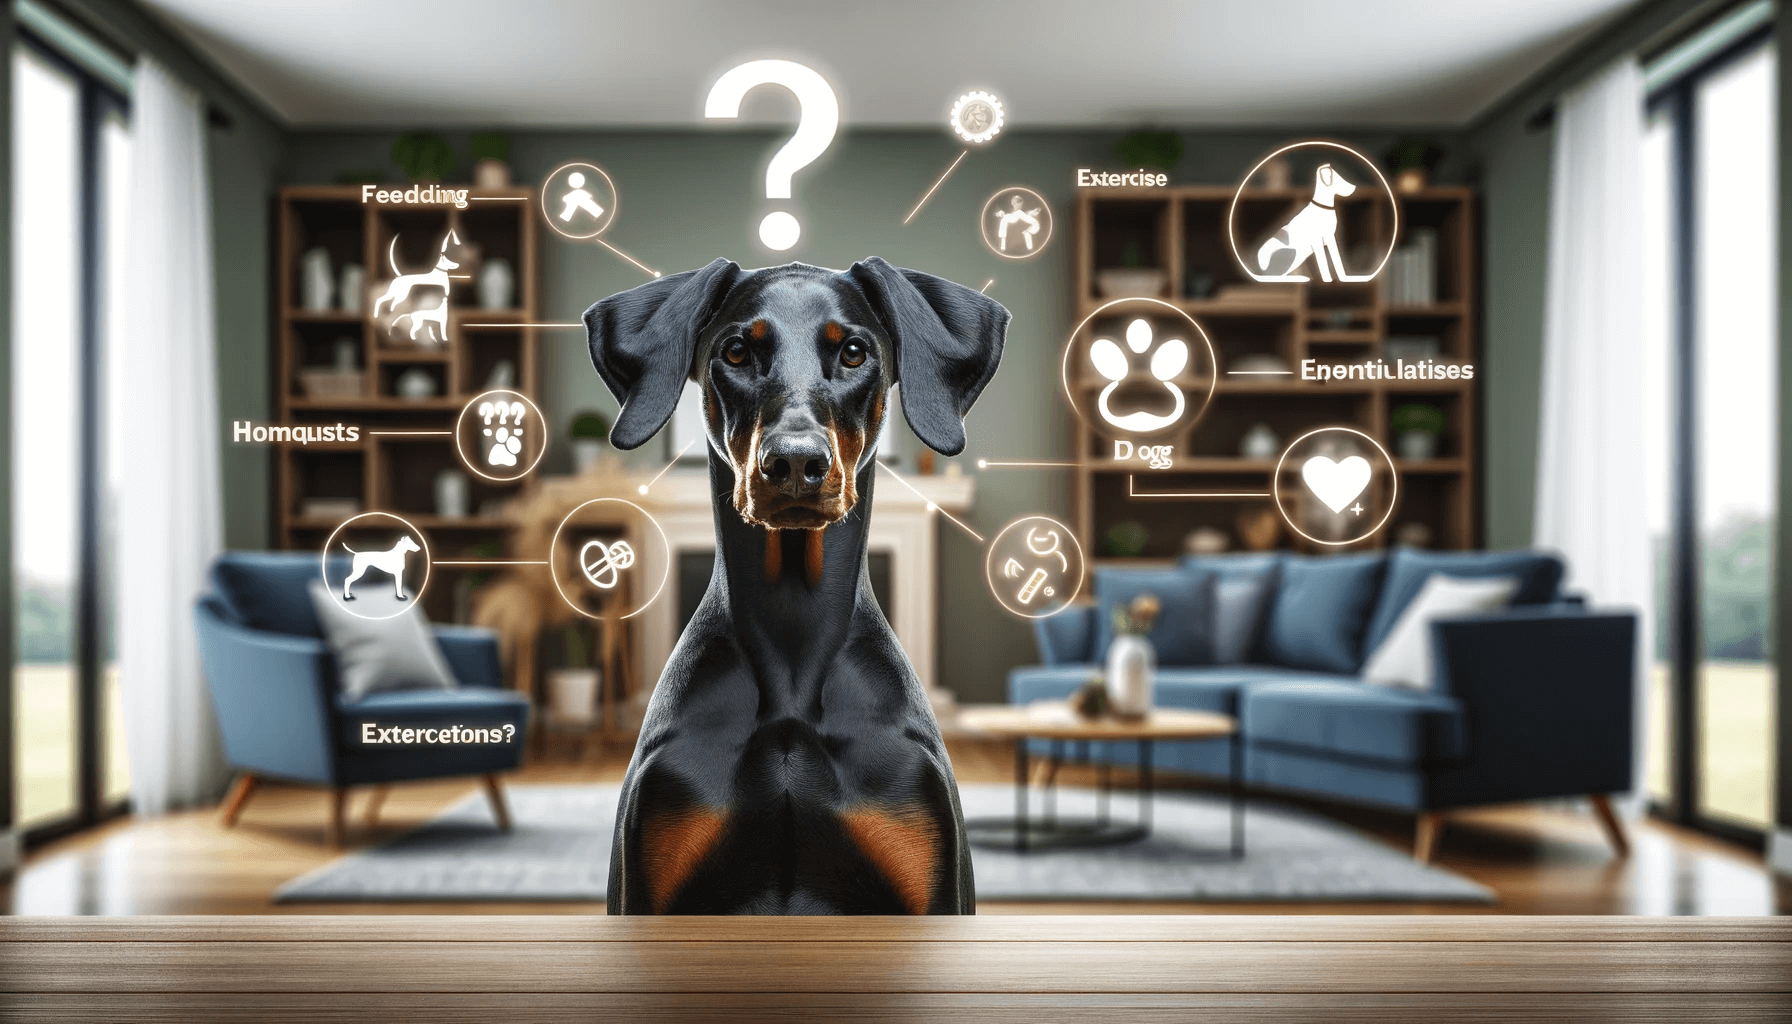 An inquisitive Blue Doberman with a question mark above its head in a home setting, representing common questions about the breed.